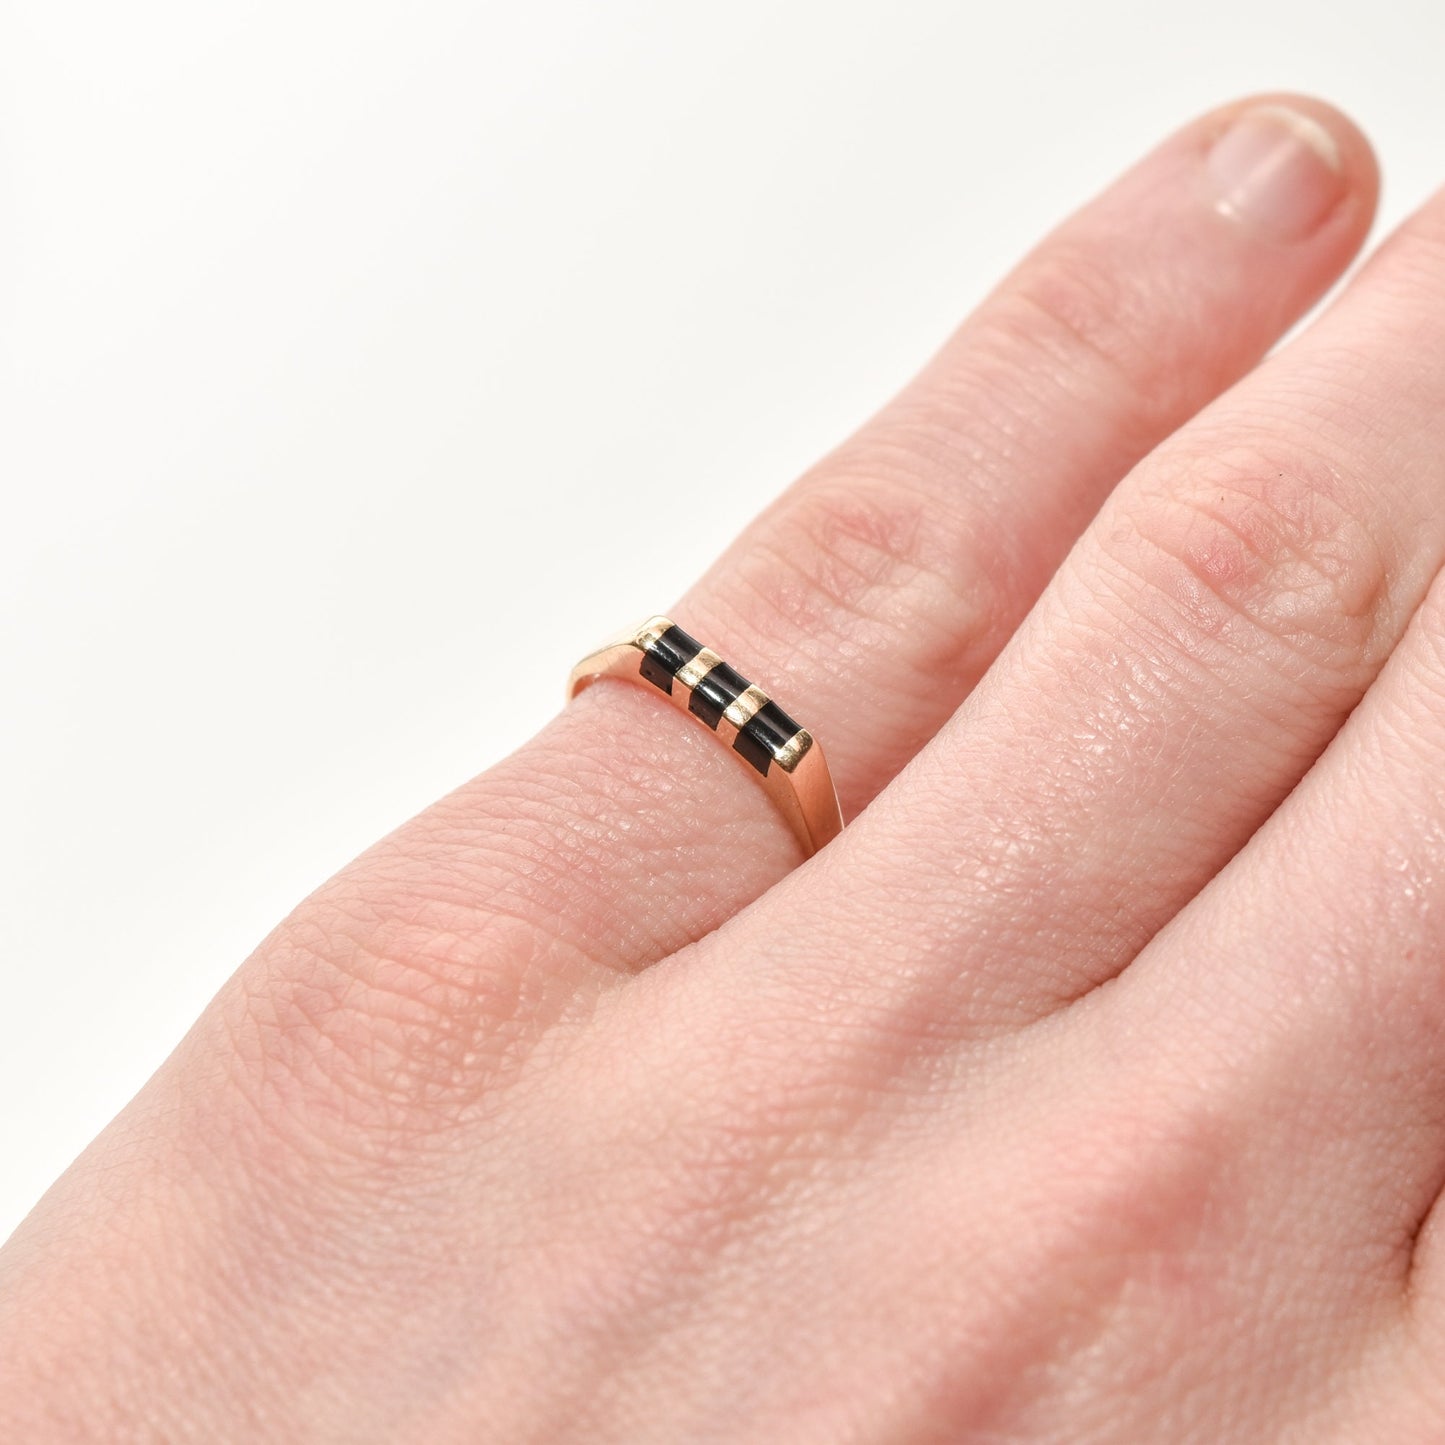 Close-up of a hand wearing a minimalist 14K black onyx inlay ring on a striped yellow gold band, size 5.5 US.